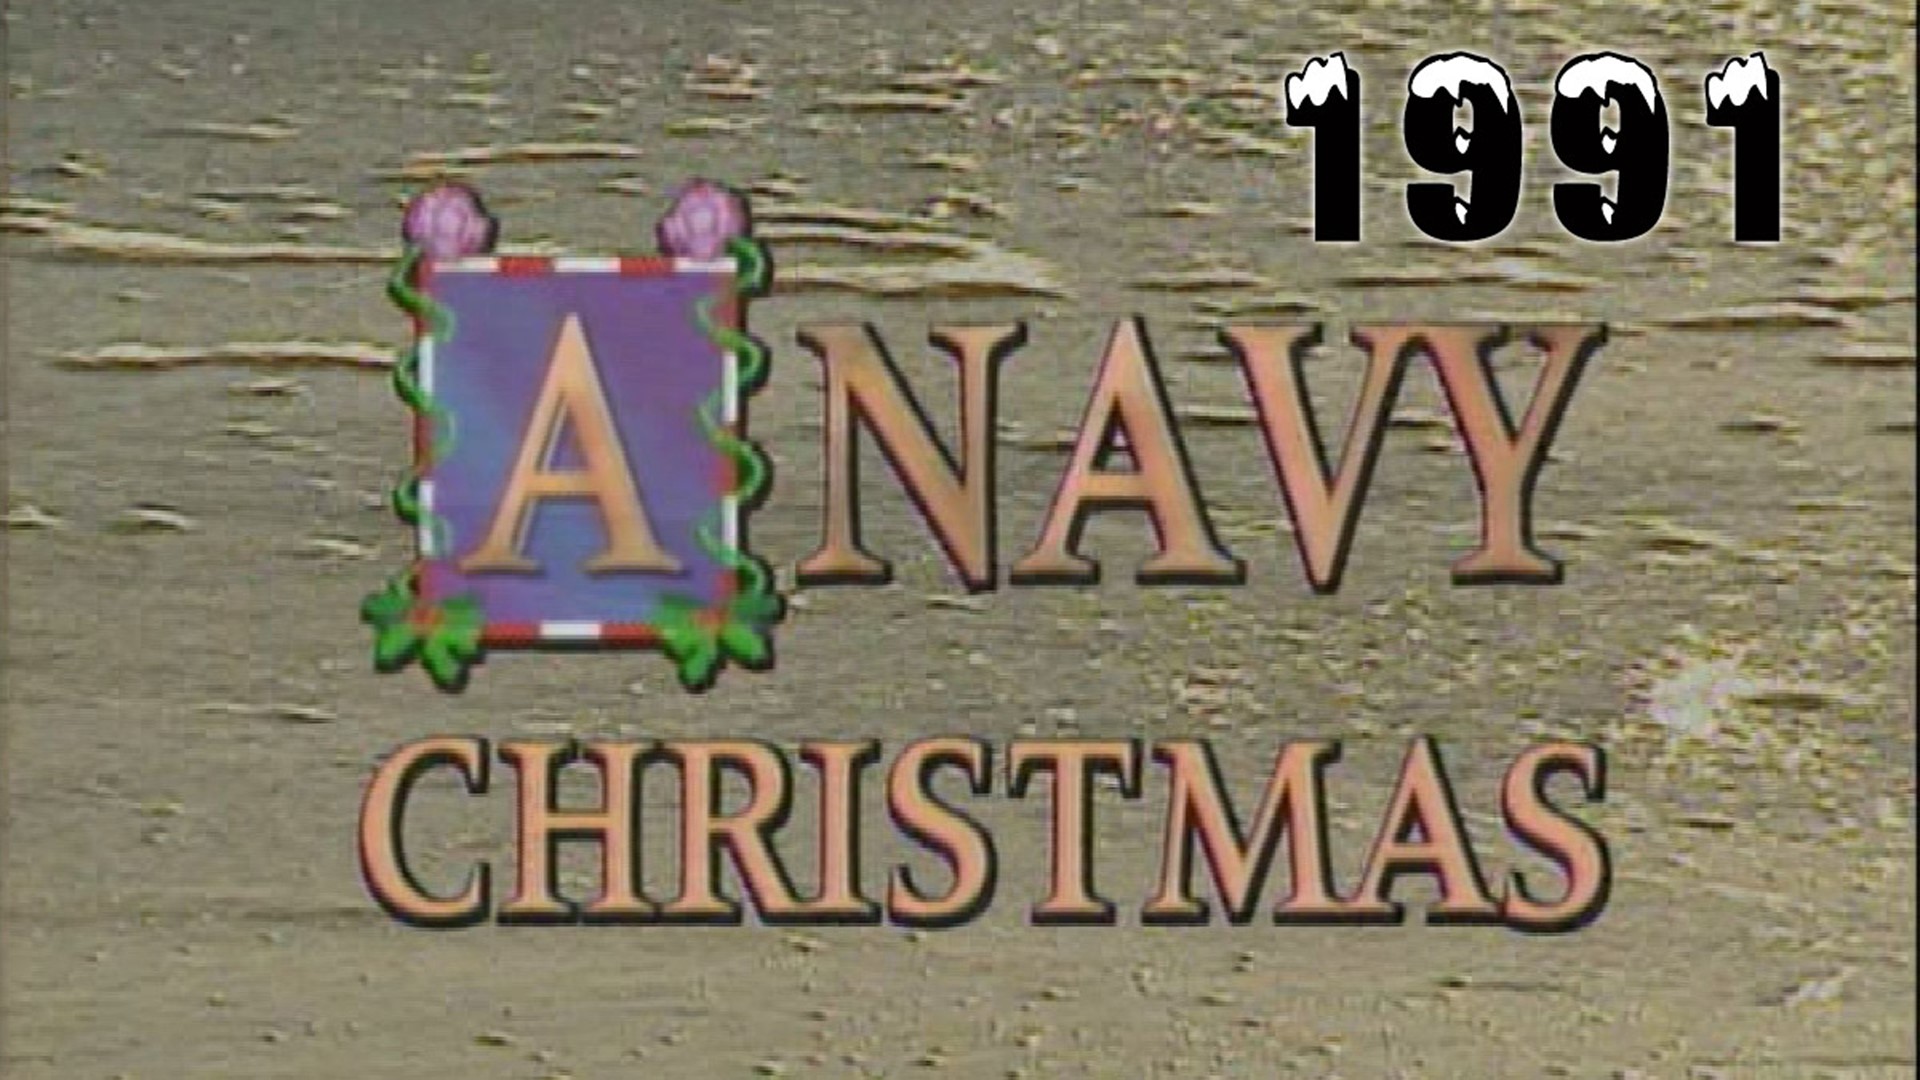 For more than 35 years, 13News Now has honored our military men and women with an annual holiday special. This is the 6th annual Navy Christmas, which aired in 1991.